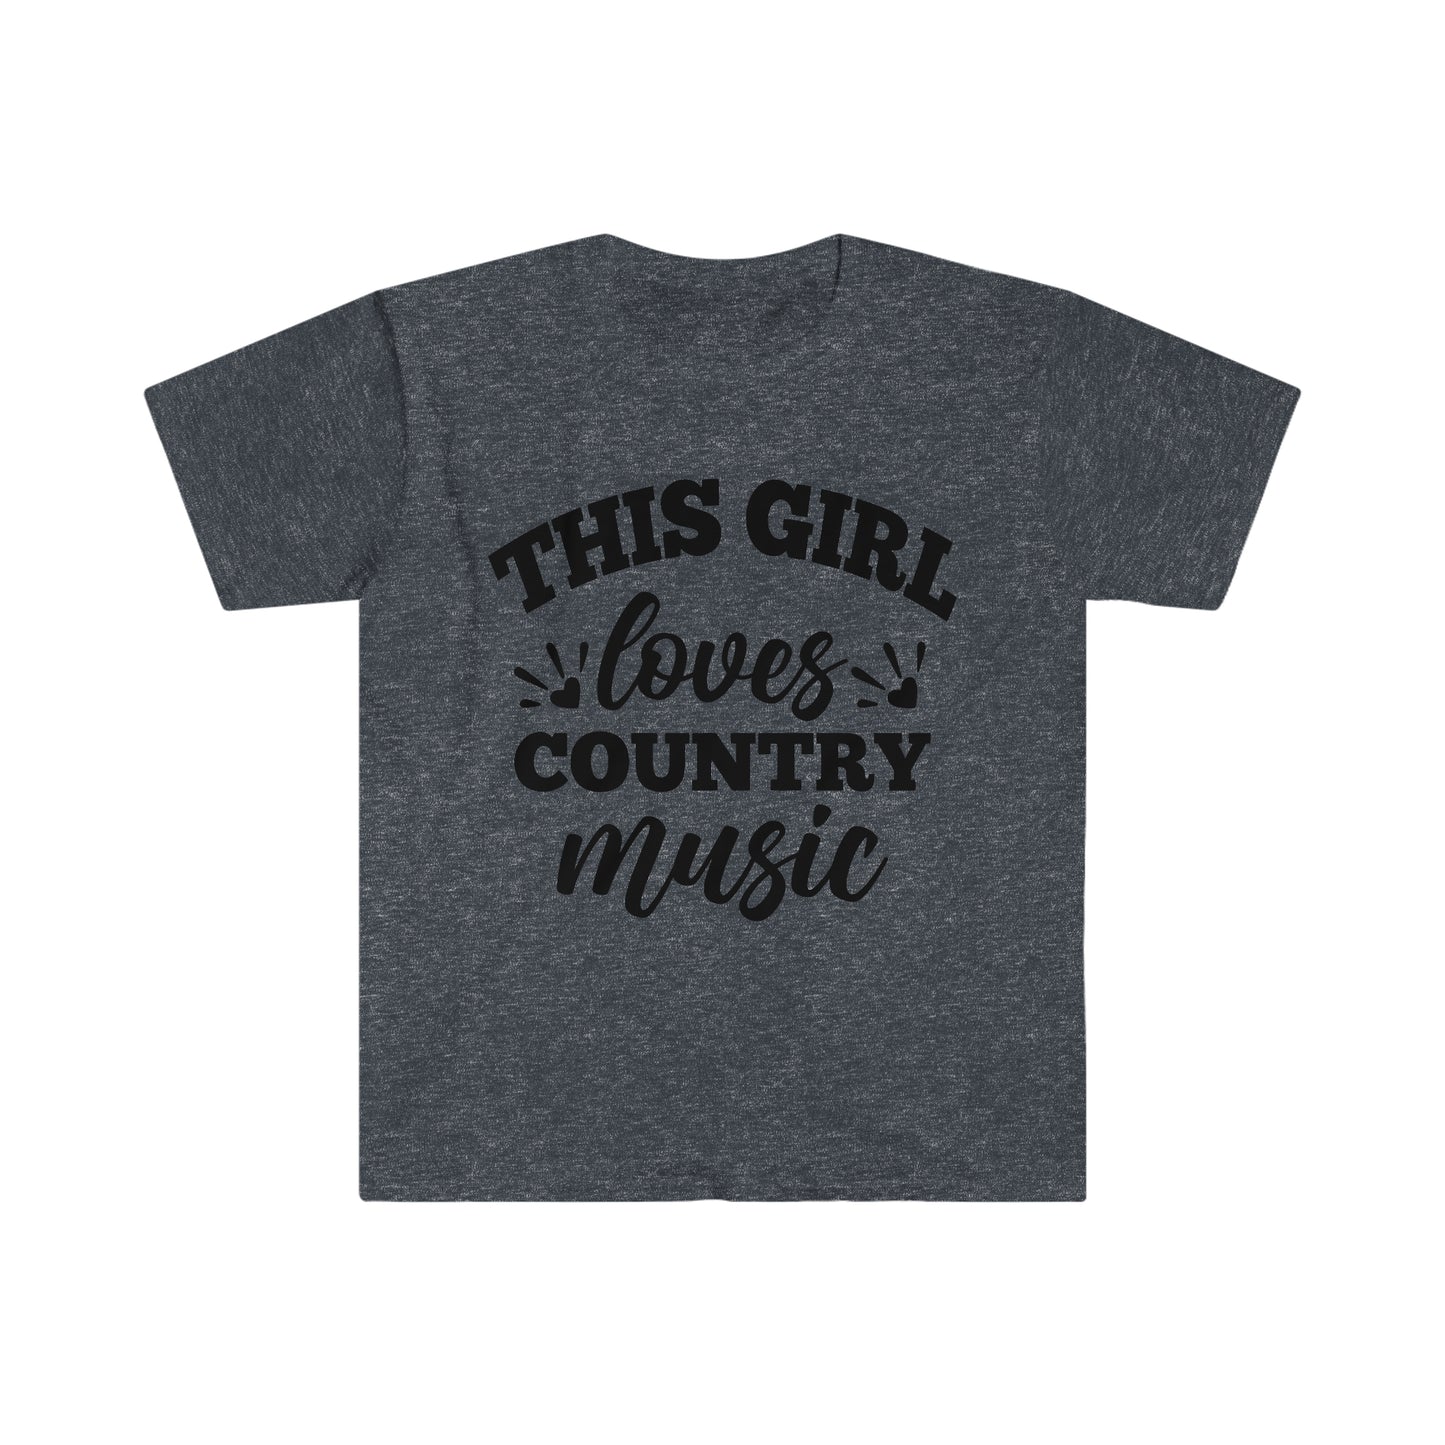 This Girl Loves Country Music - Unisex Softstyle T-Shirt